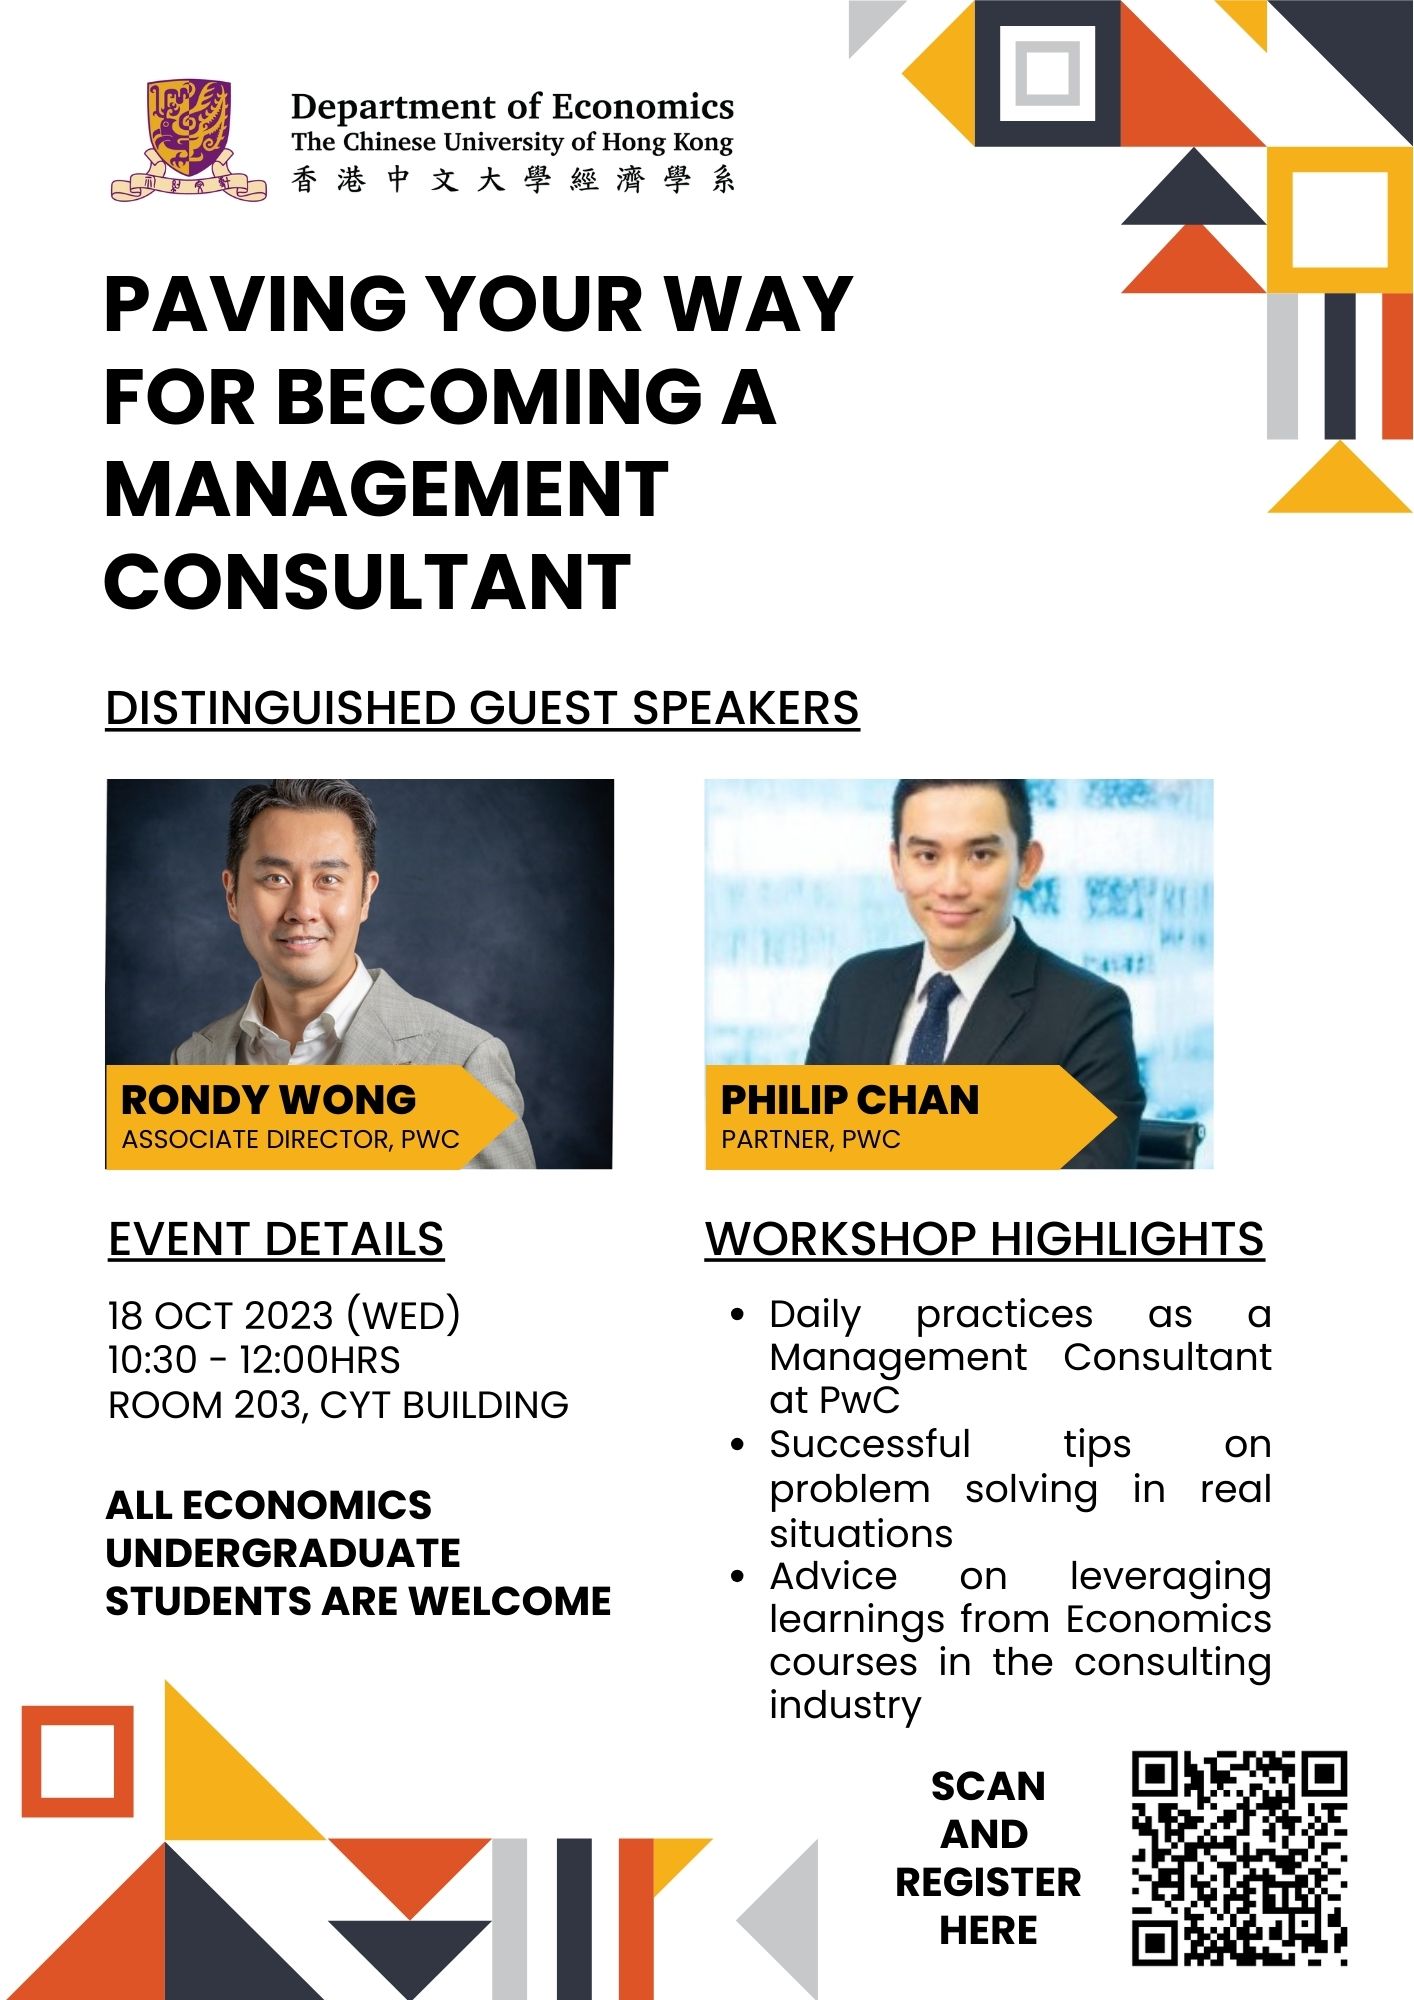 Career Workshop - Paving Your Way For Becoming a Management Consultant